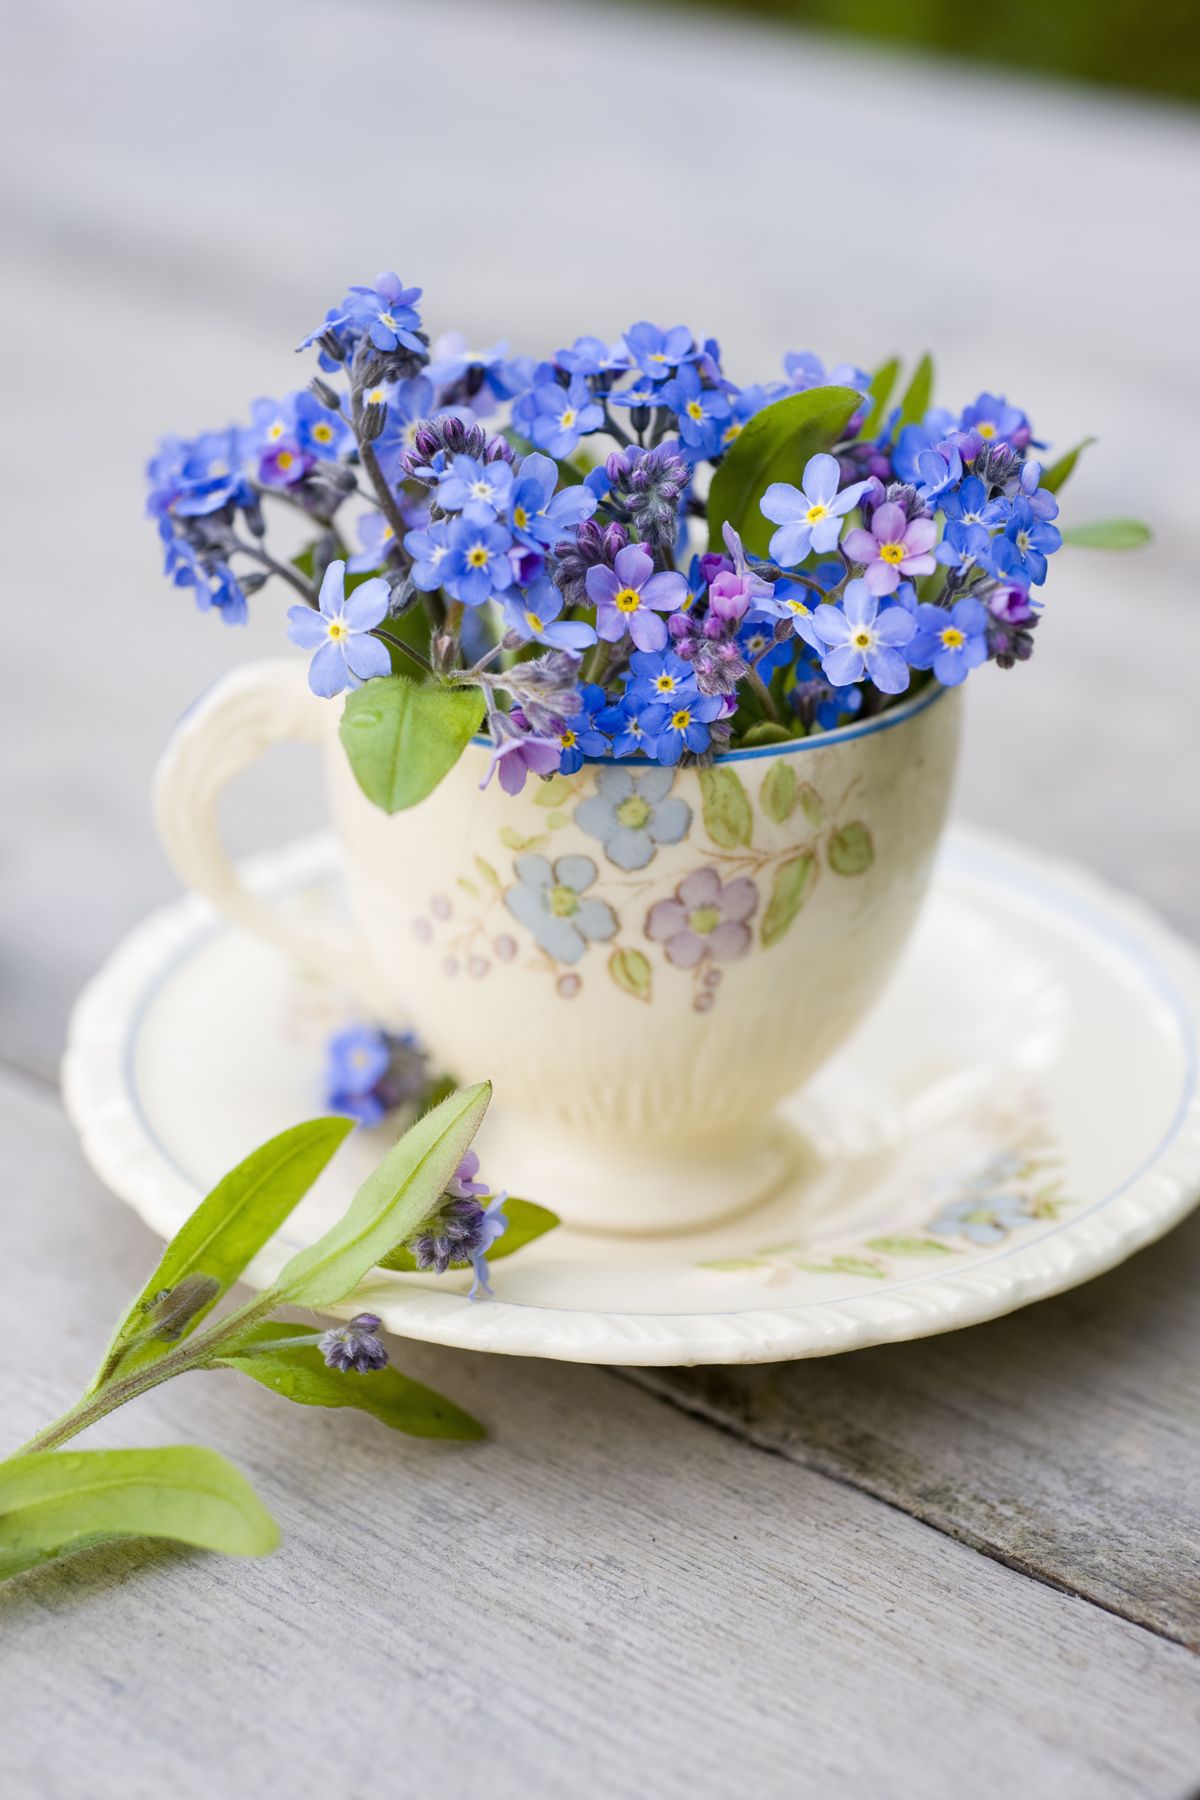 forget me not flowers meaning